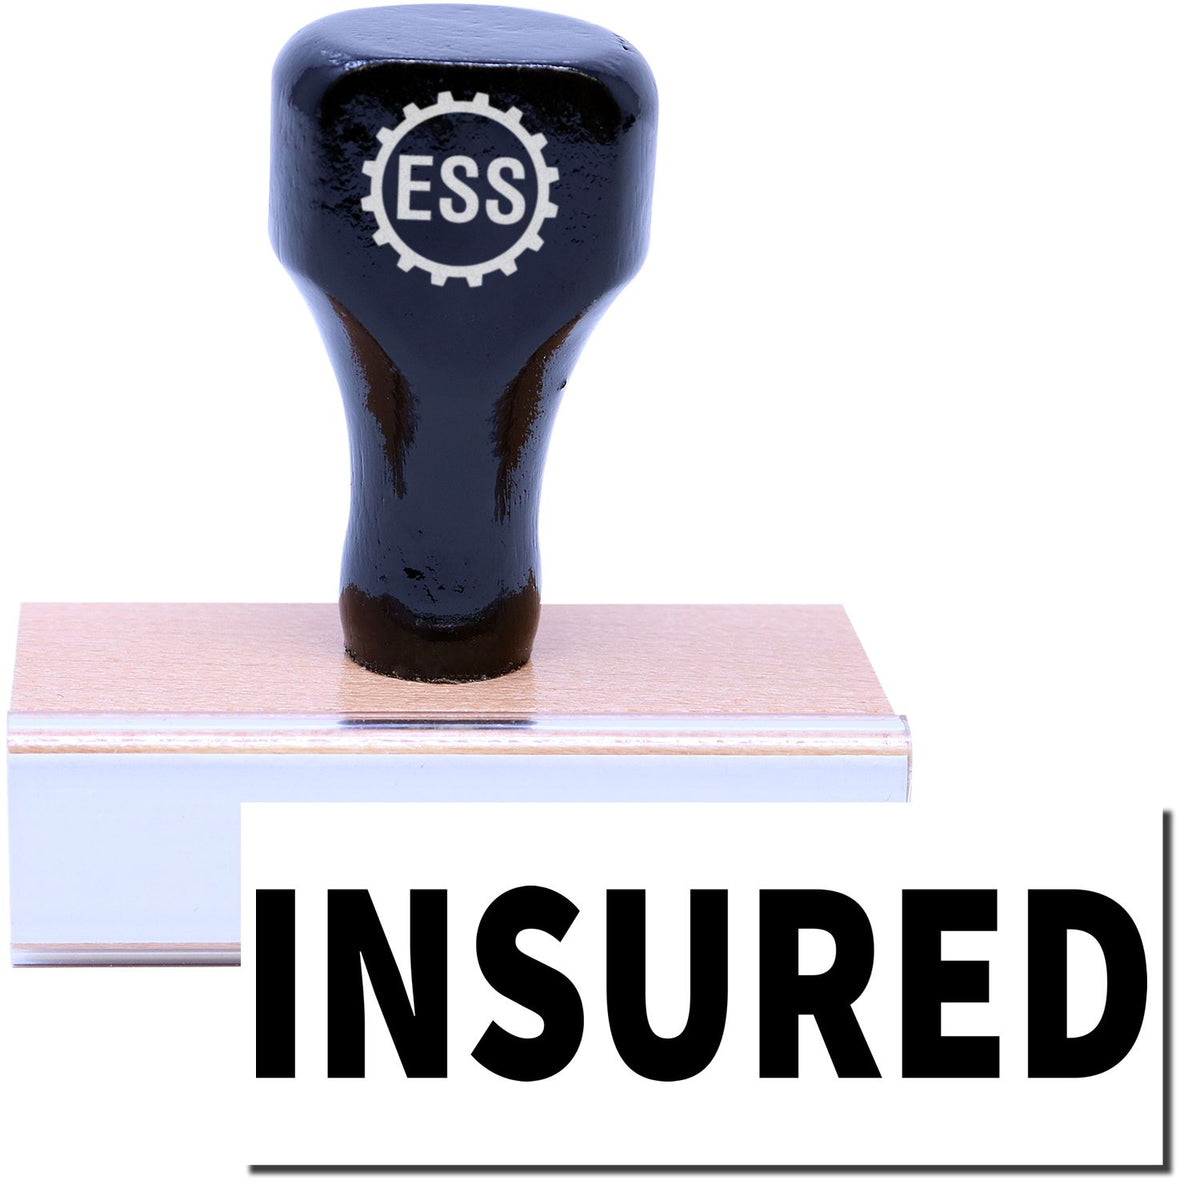 A stock office rubber stamp with a stamped image showing how the text &quot;INSURED&quot; in a large font is displayed after stamping.